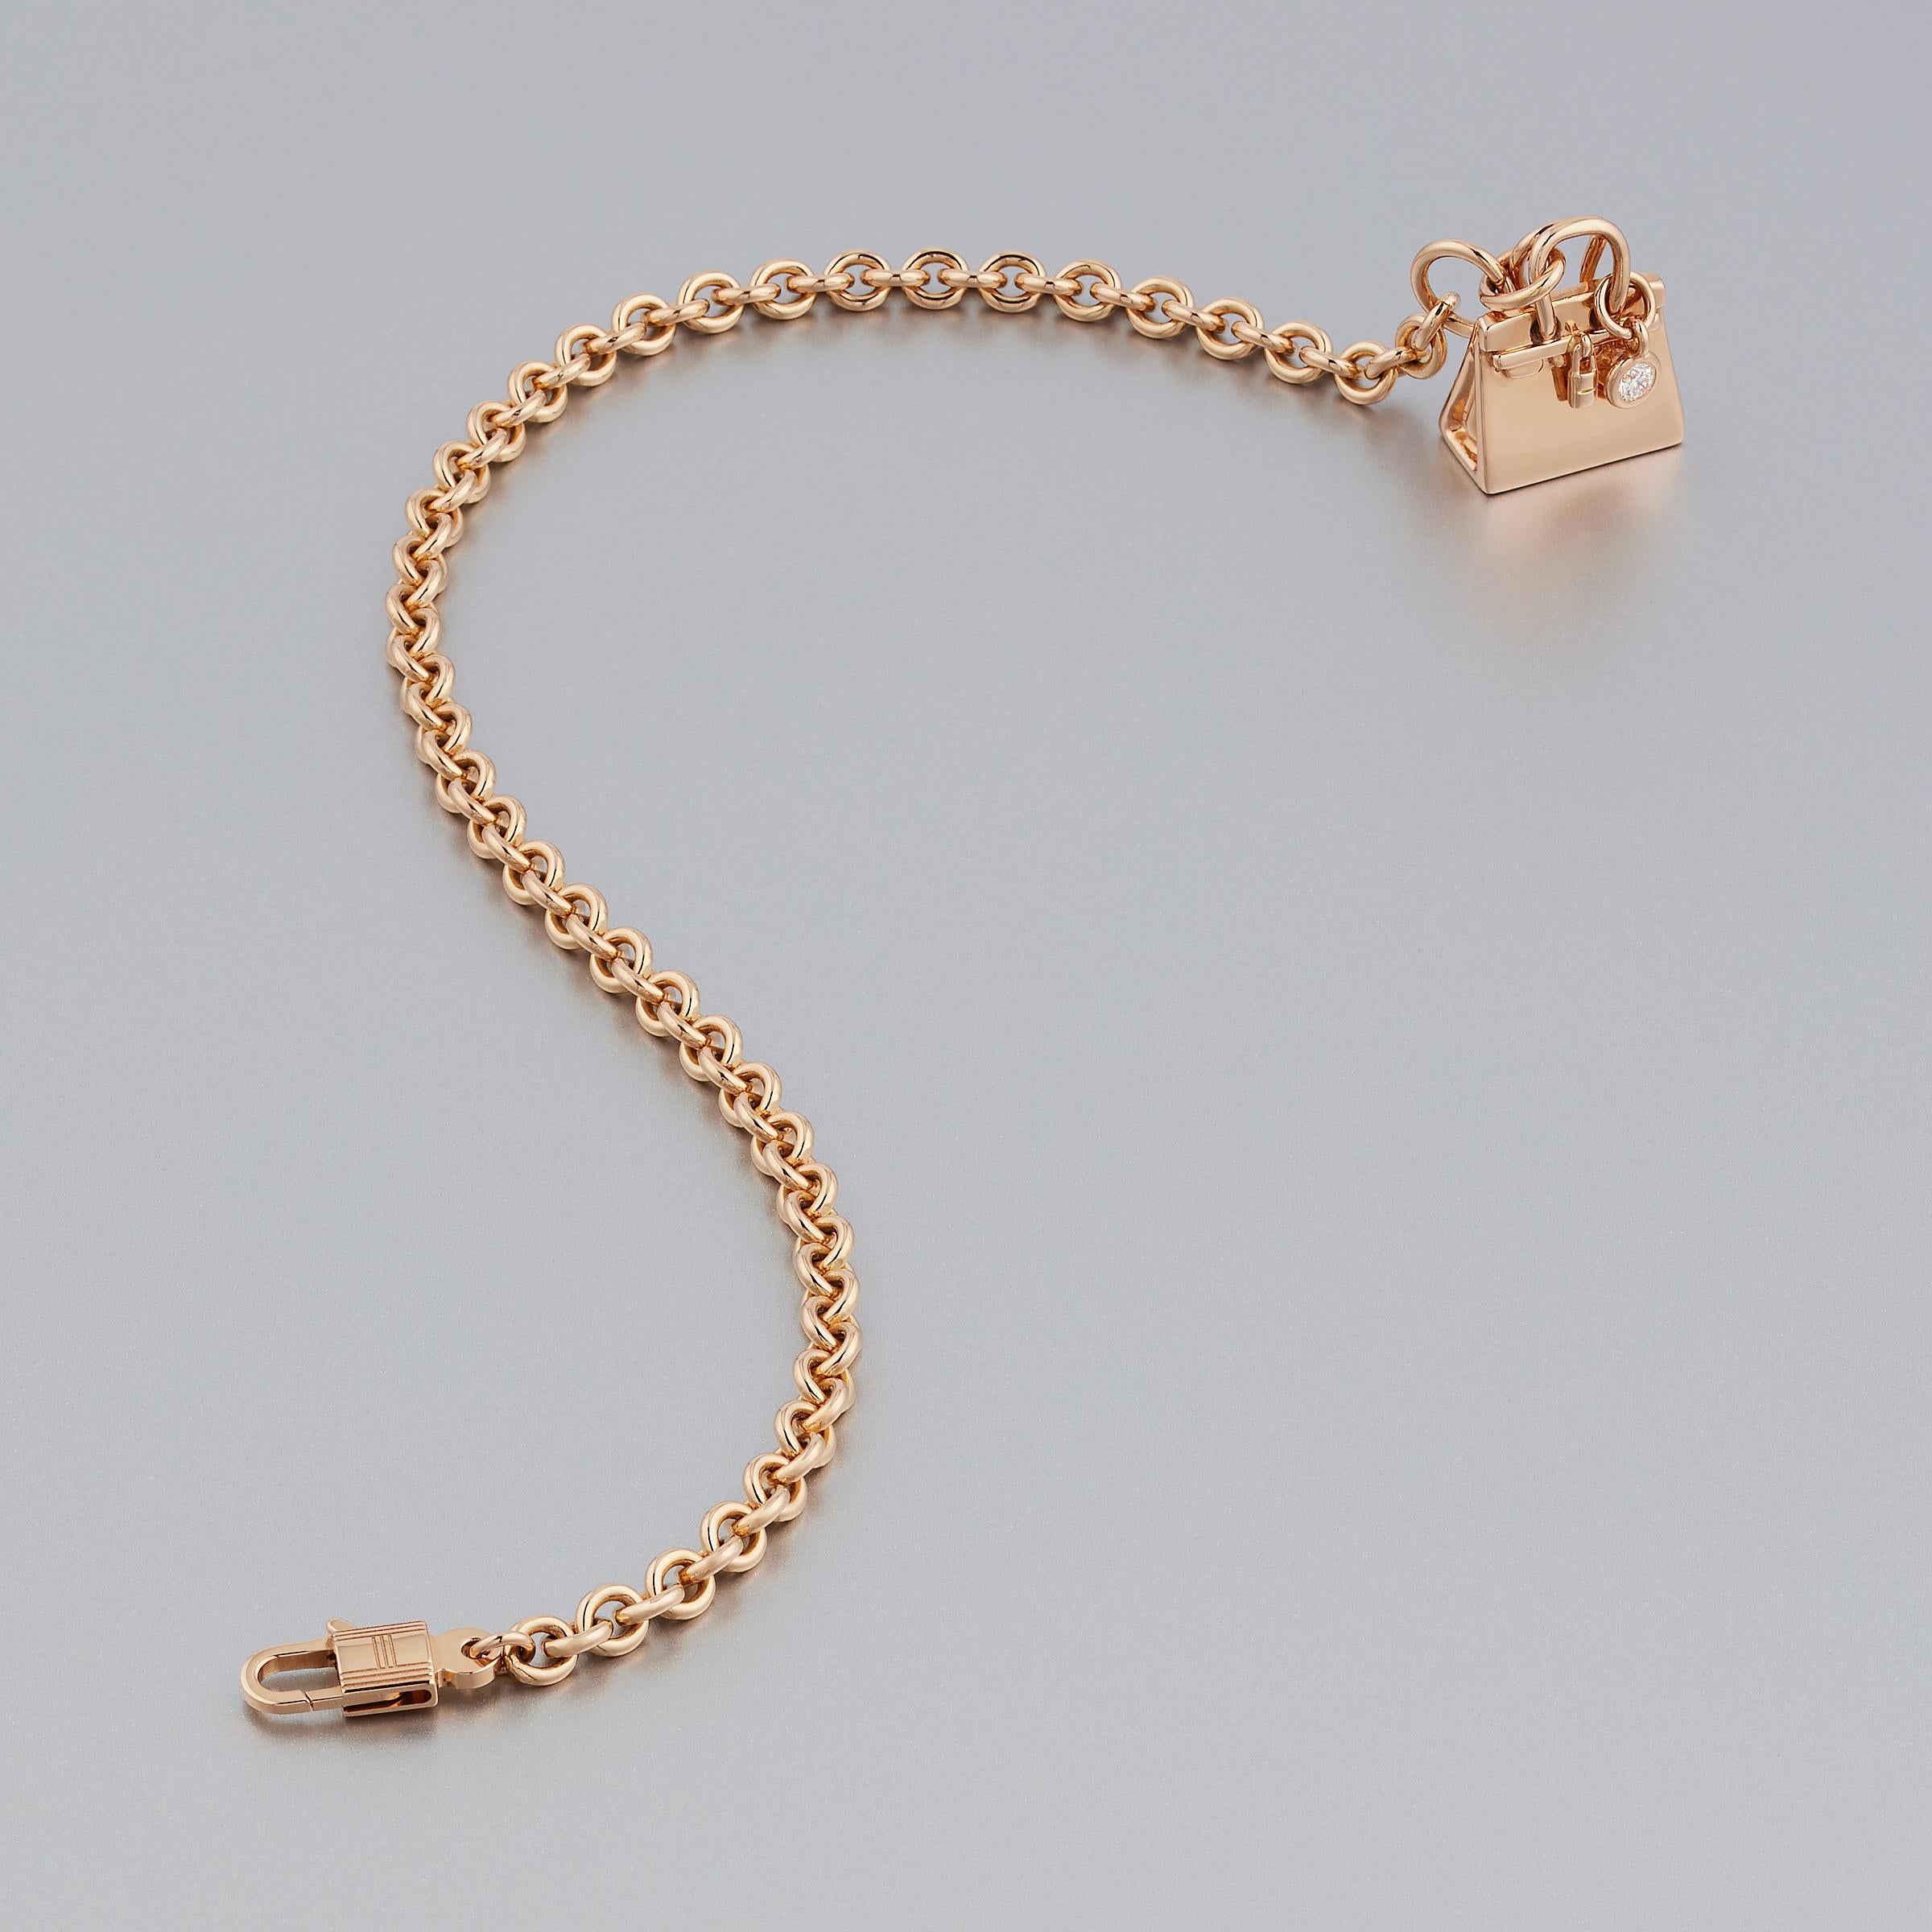 Stylish Hermes Birkin Amulette diamond bracelet in 18 karat gold. This delicate chain bracelet is part of Hermes popular Amulettes collection and features a delightful Birking bag shaped charm. The bracelet glows with radiance of high-polish rose